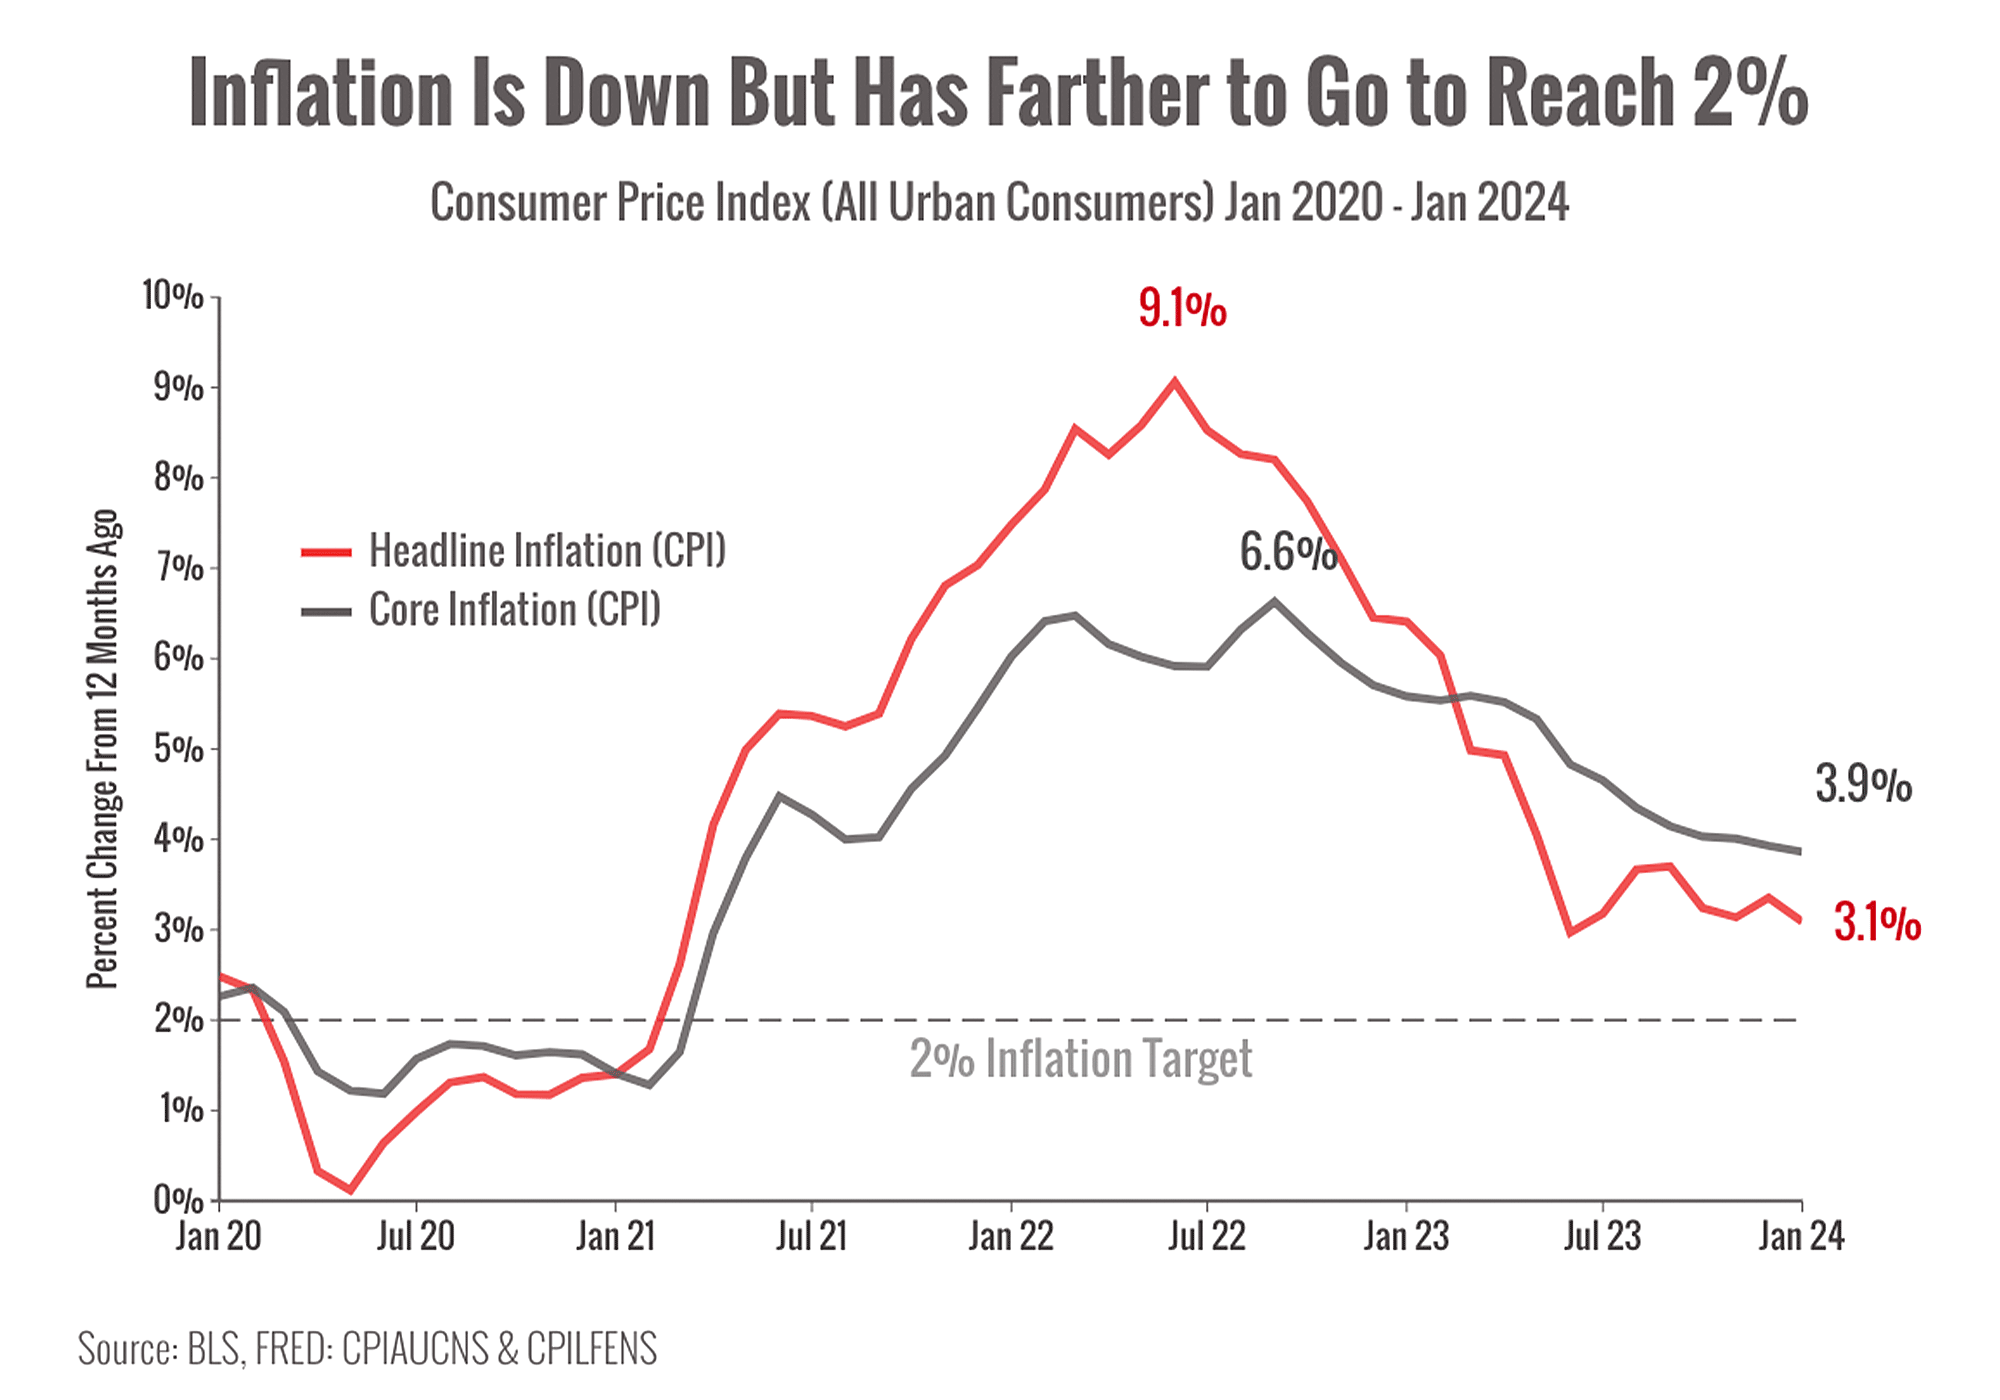 Line graph titled "Inflation is Down But Has Farther to Go to Reach 2%", with inflation rates from January 2020 to January 2024.